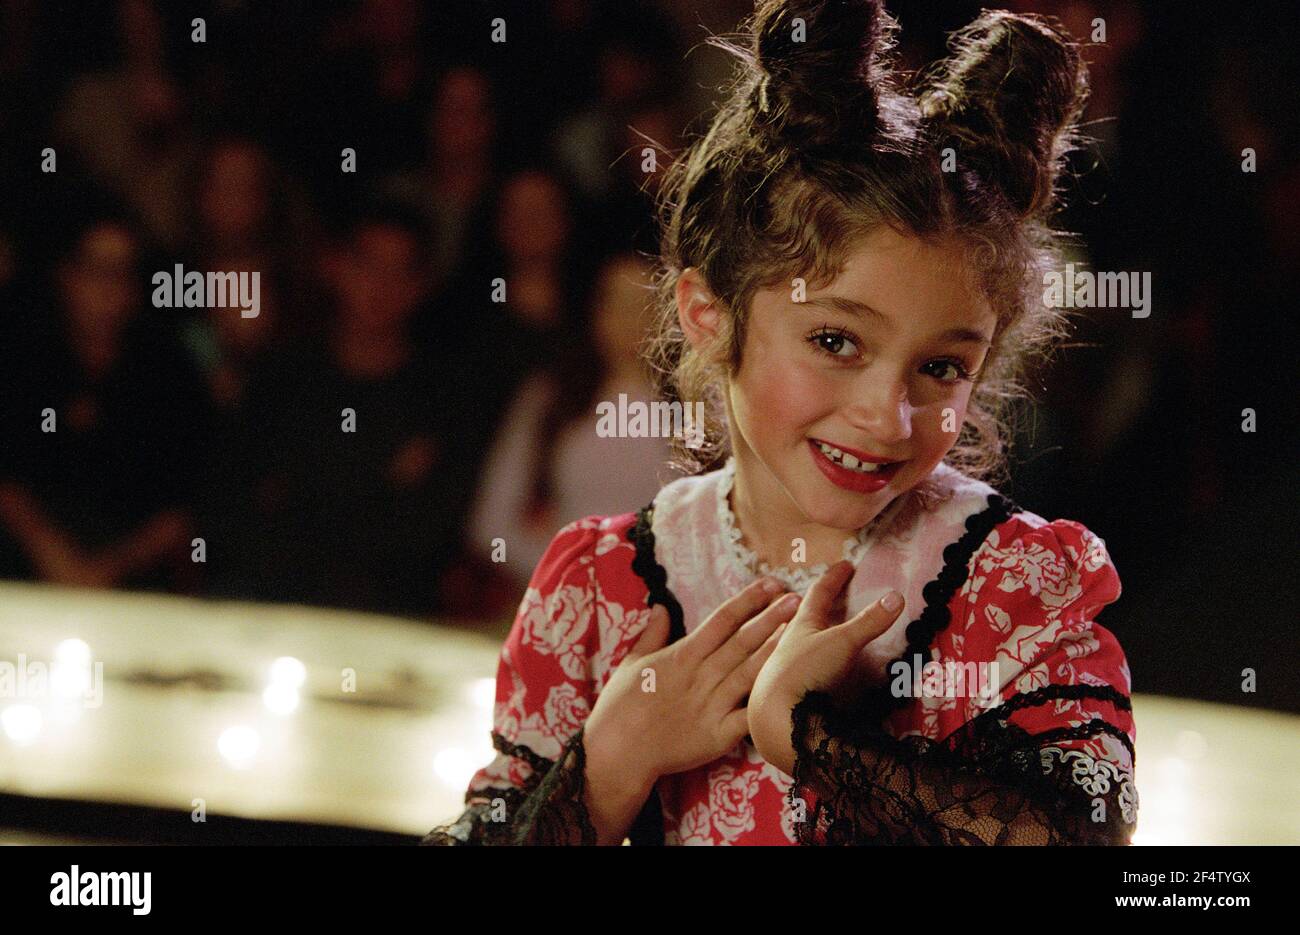 RAQUEL CASTRO in JERSEY GIRL (2004), directed by KEVIN SMITH. Credit:  MIRAMAX / Album Stock Photo - Alamy